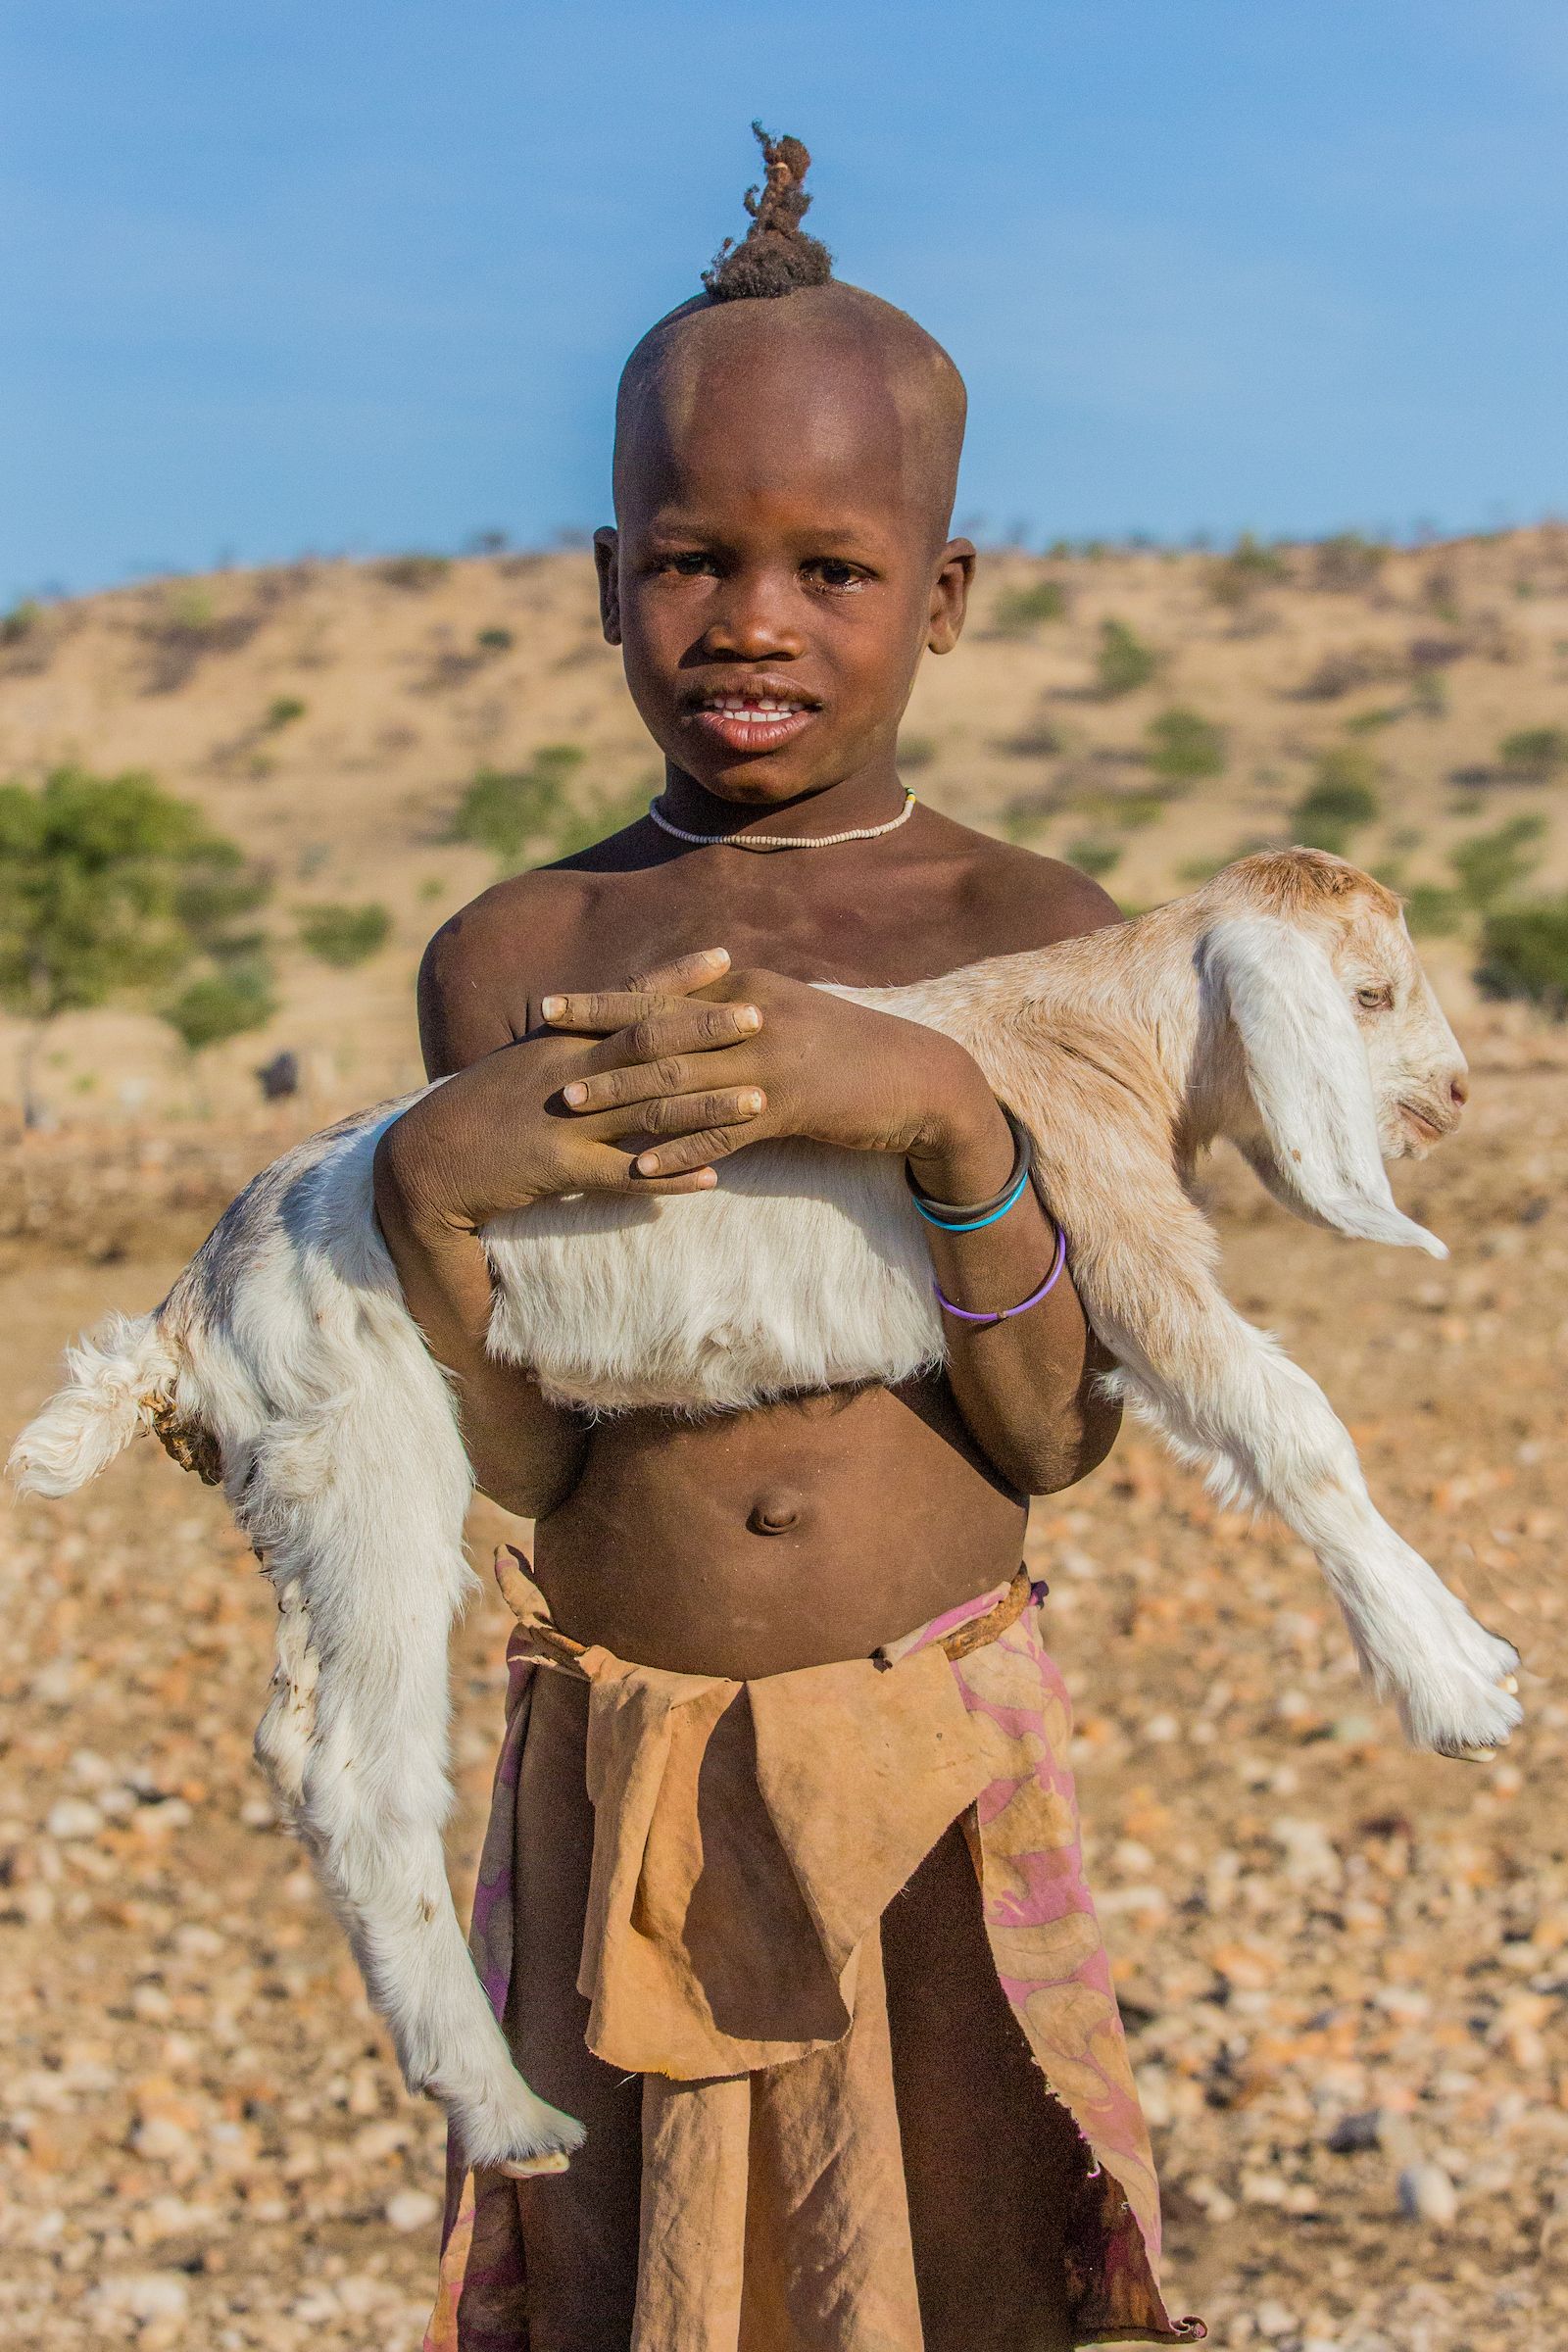 A young Himba boy and his goat on our photography tour in Namibia